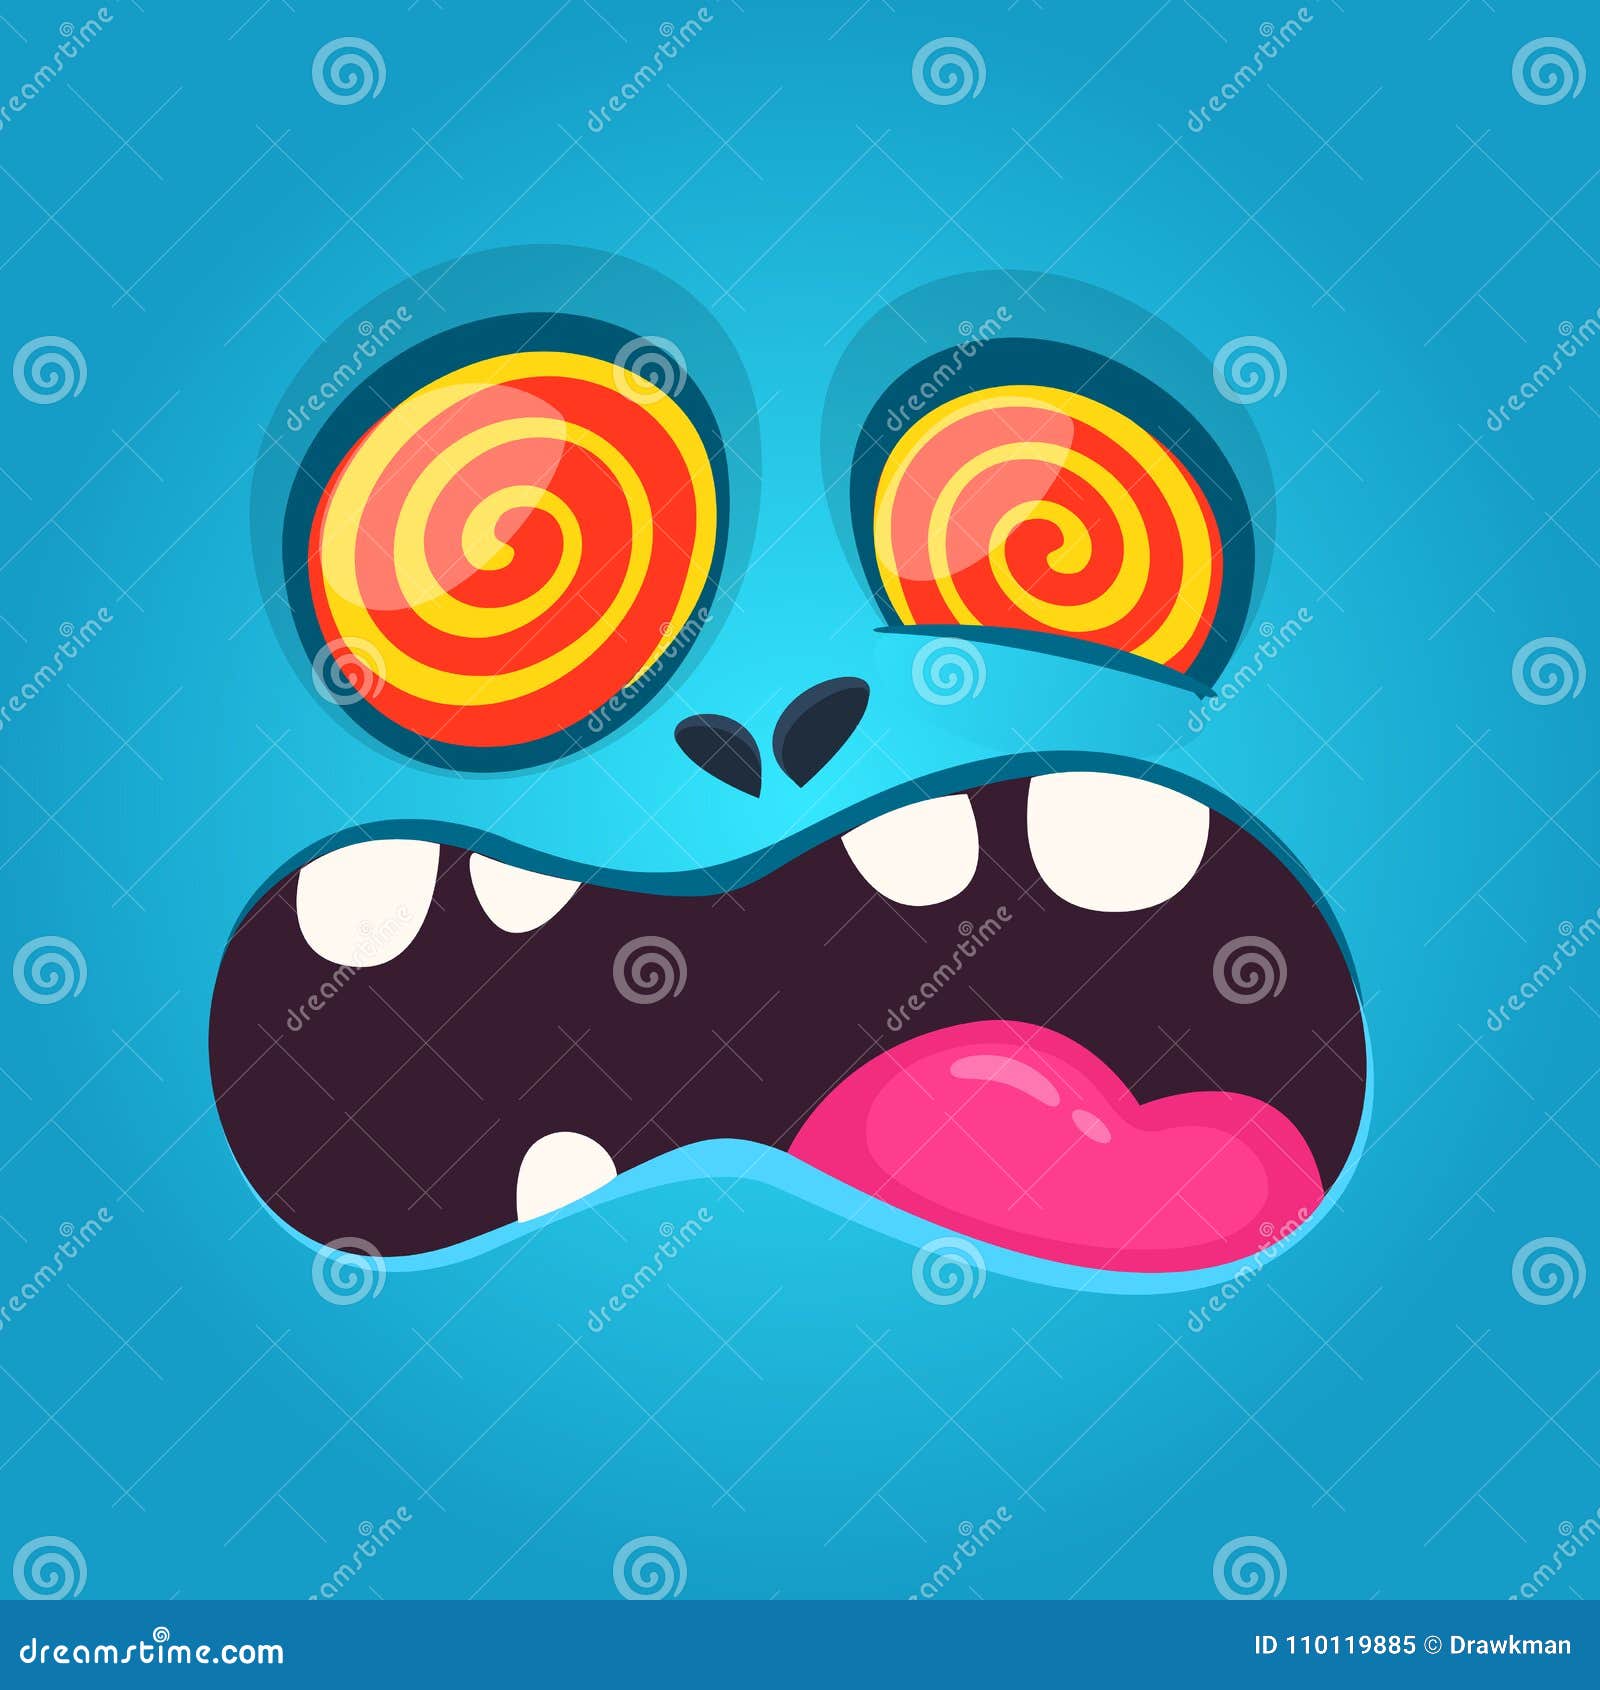 funny hypnotized cartoon monster face.  halloween blue scary monster 